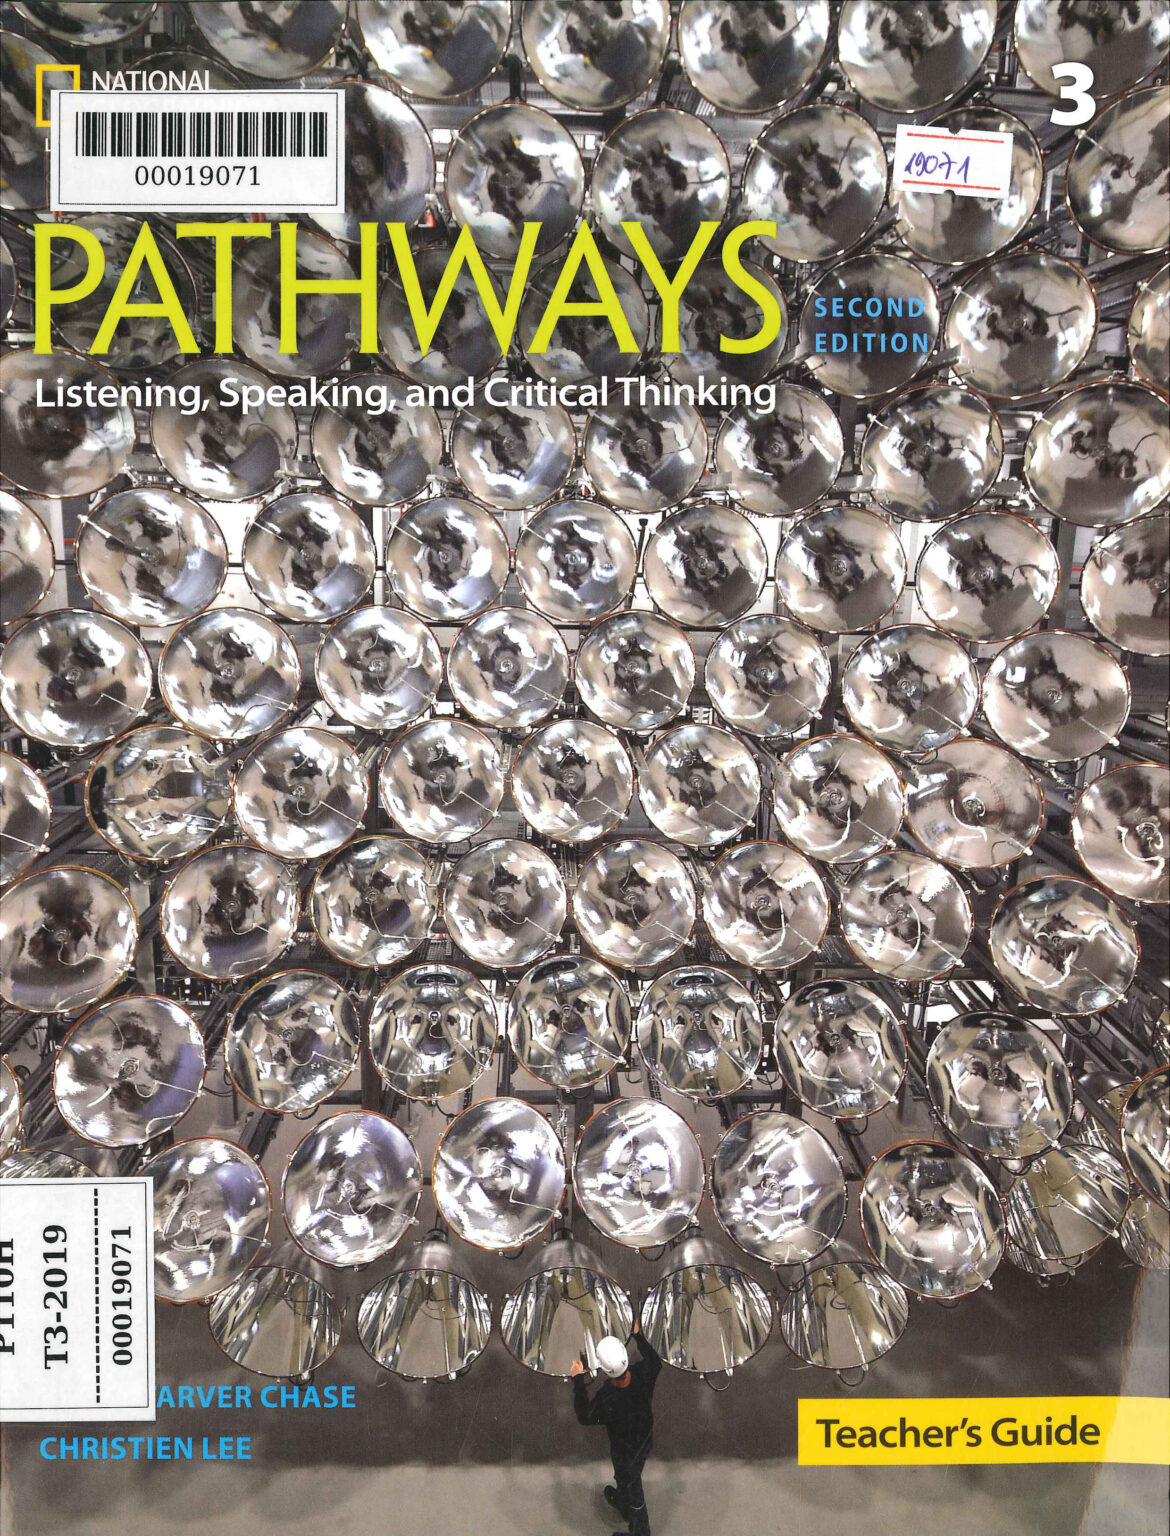 pathways 4 listening speaking and critical thinking teacher's guide pdf